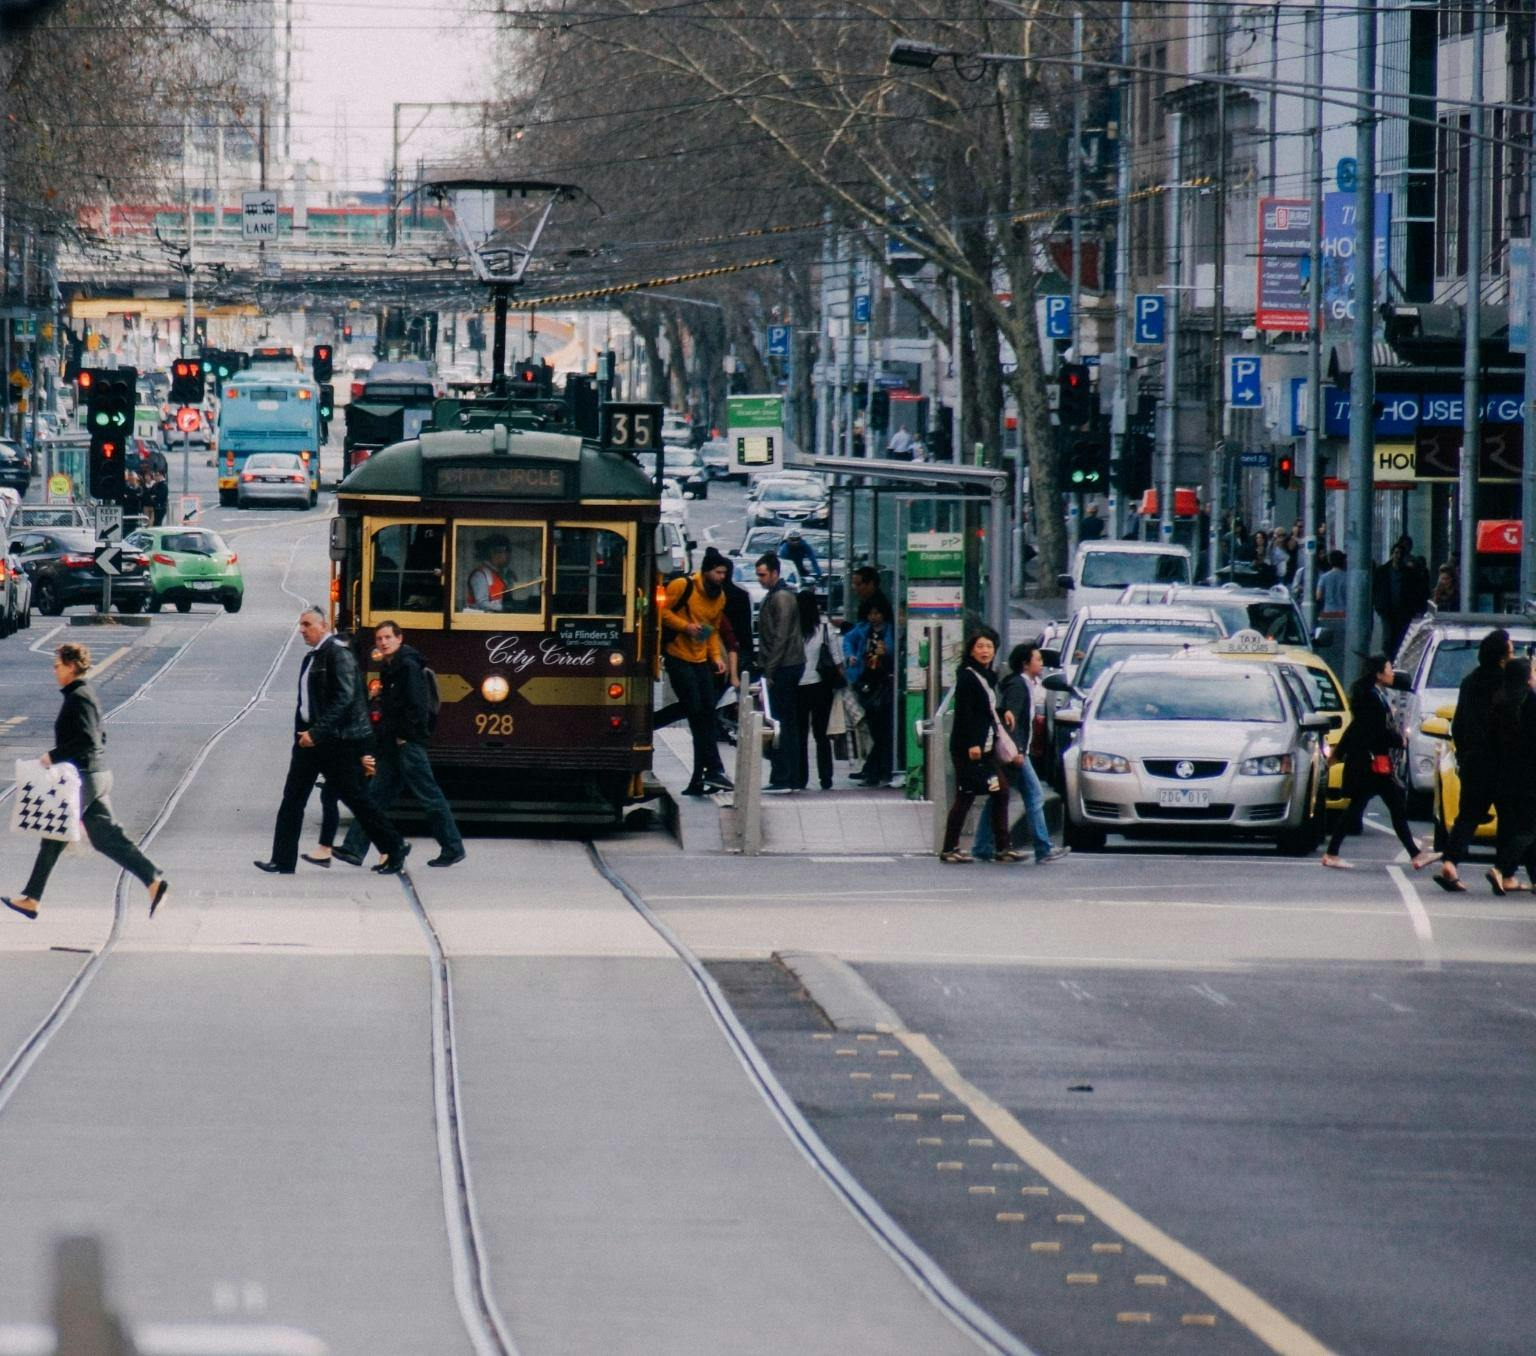 Streetscape of a melbourne street. There is a yellow and green tram, cars on the street and people crossing the road.